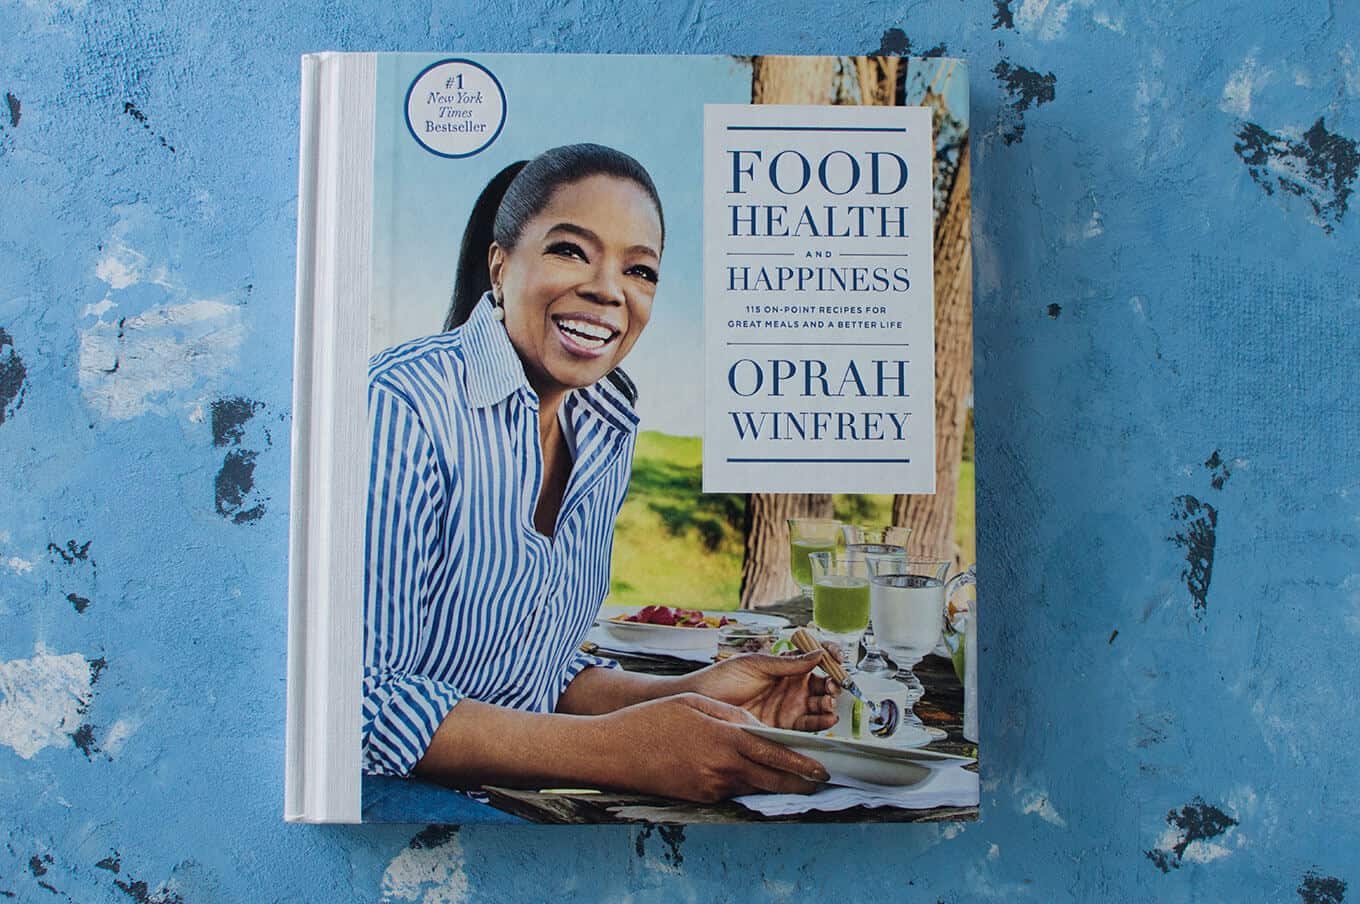 A cookbook with Oprah Winfrey on the cover.